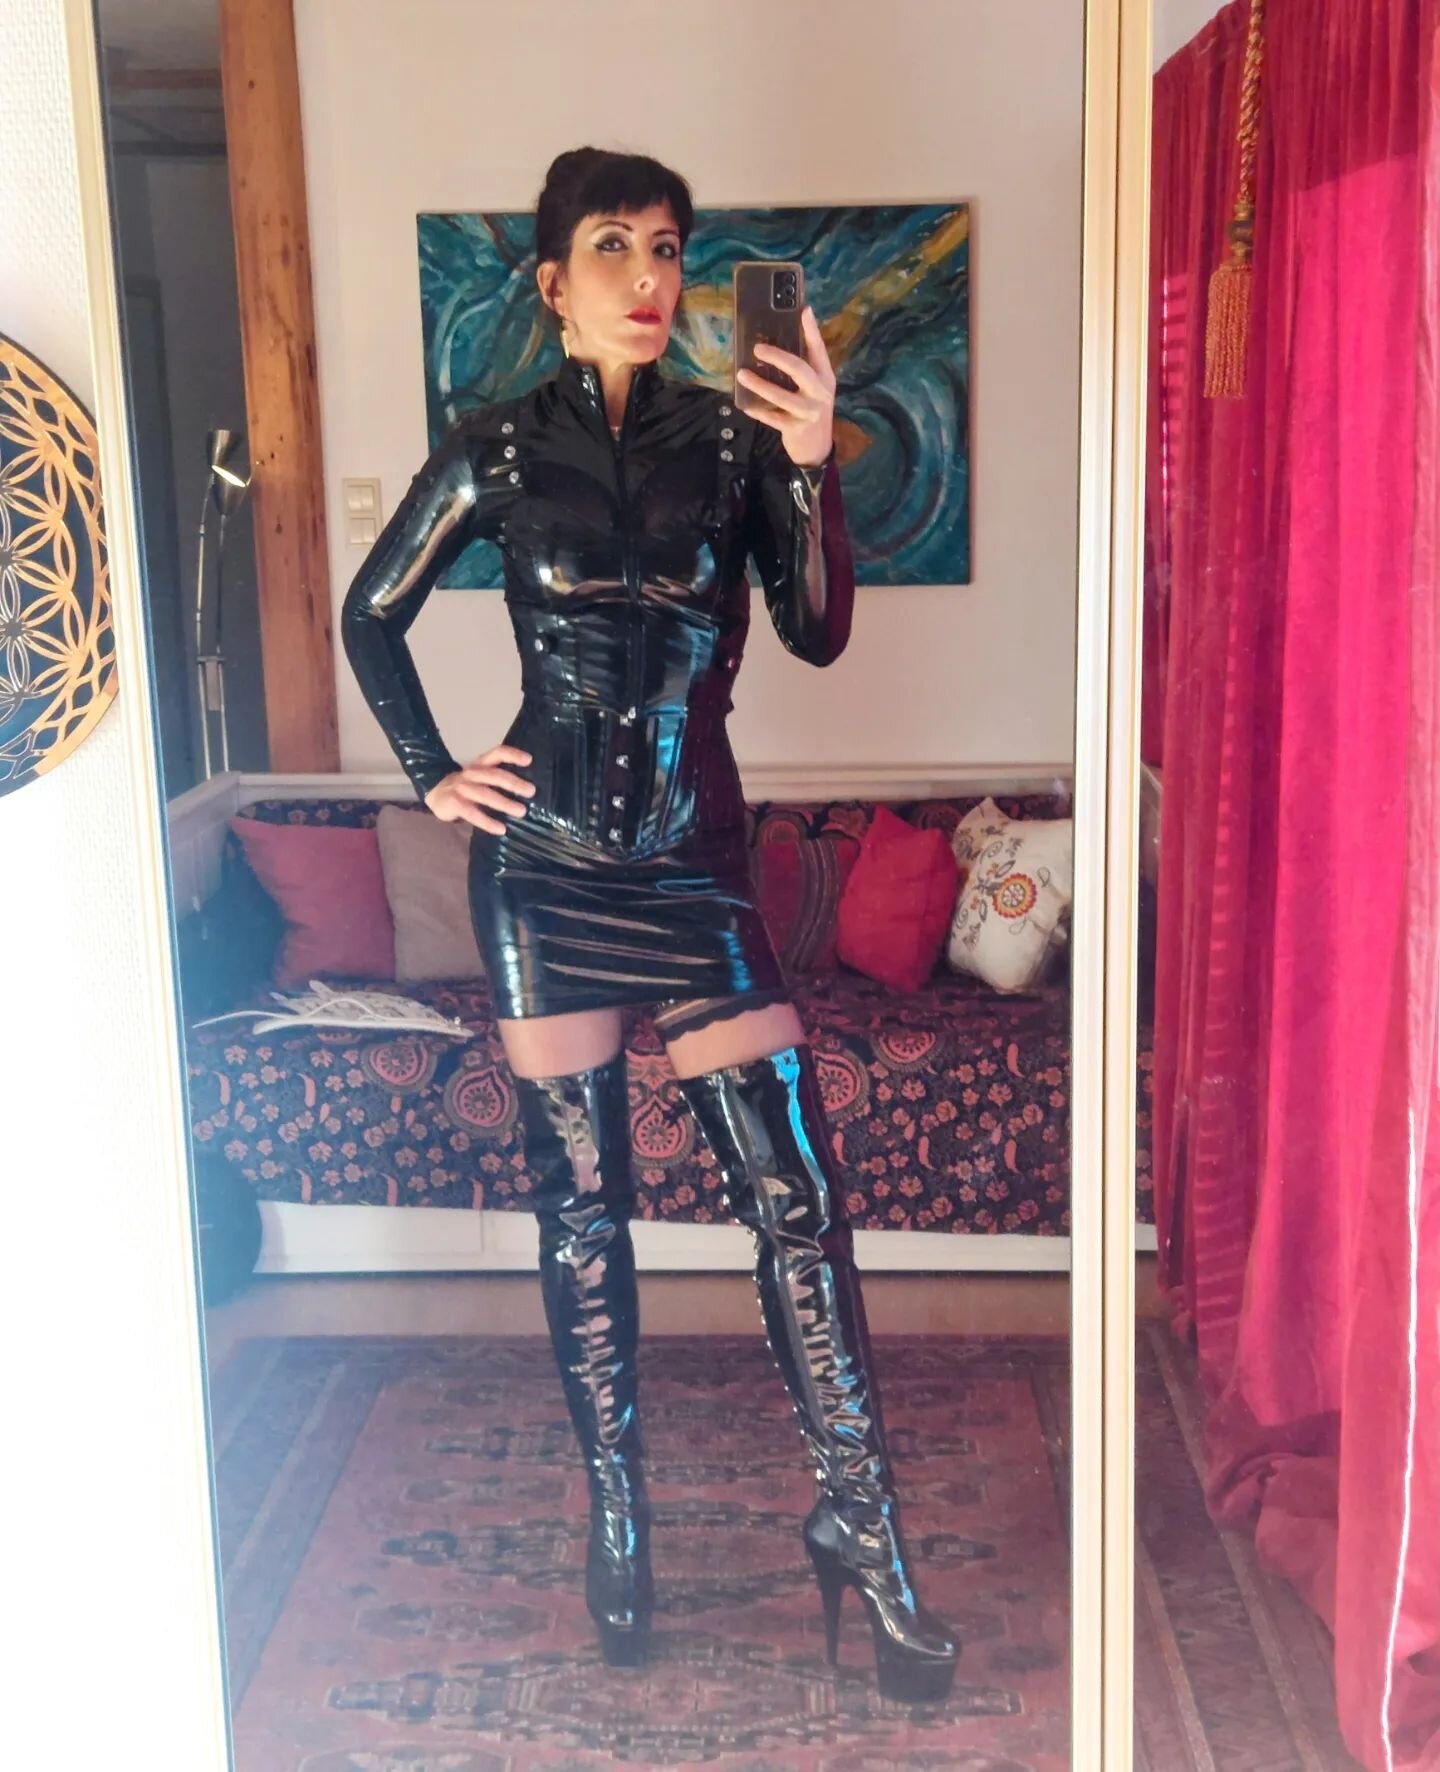 Wow!!! Epic session today! I'm feeling fierce! 

#tantricdomina #shiny #thighhighboots
#dominatrix
#honourclothing
#pleaserboots